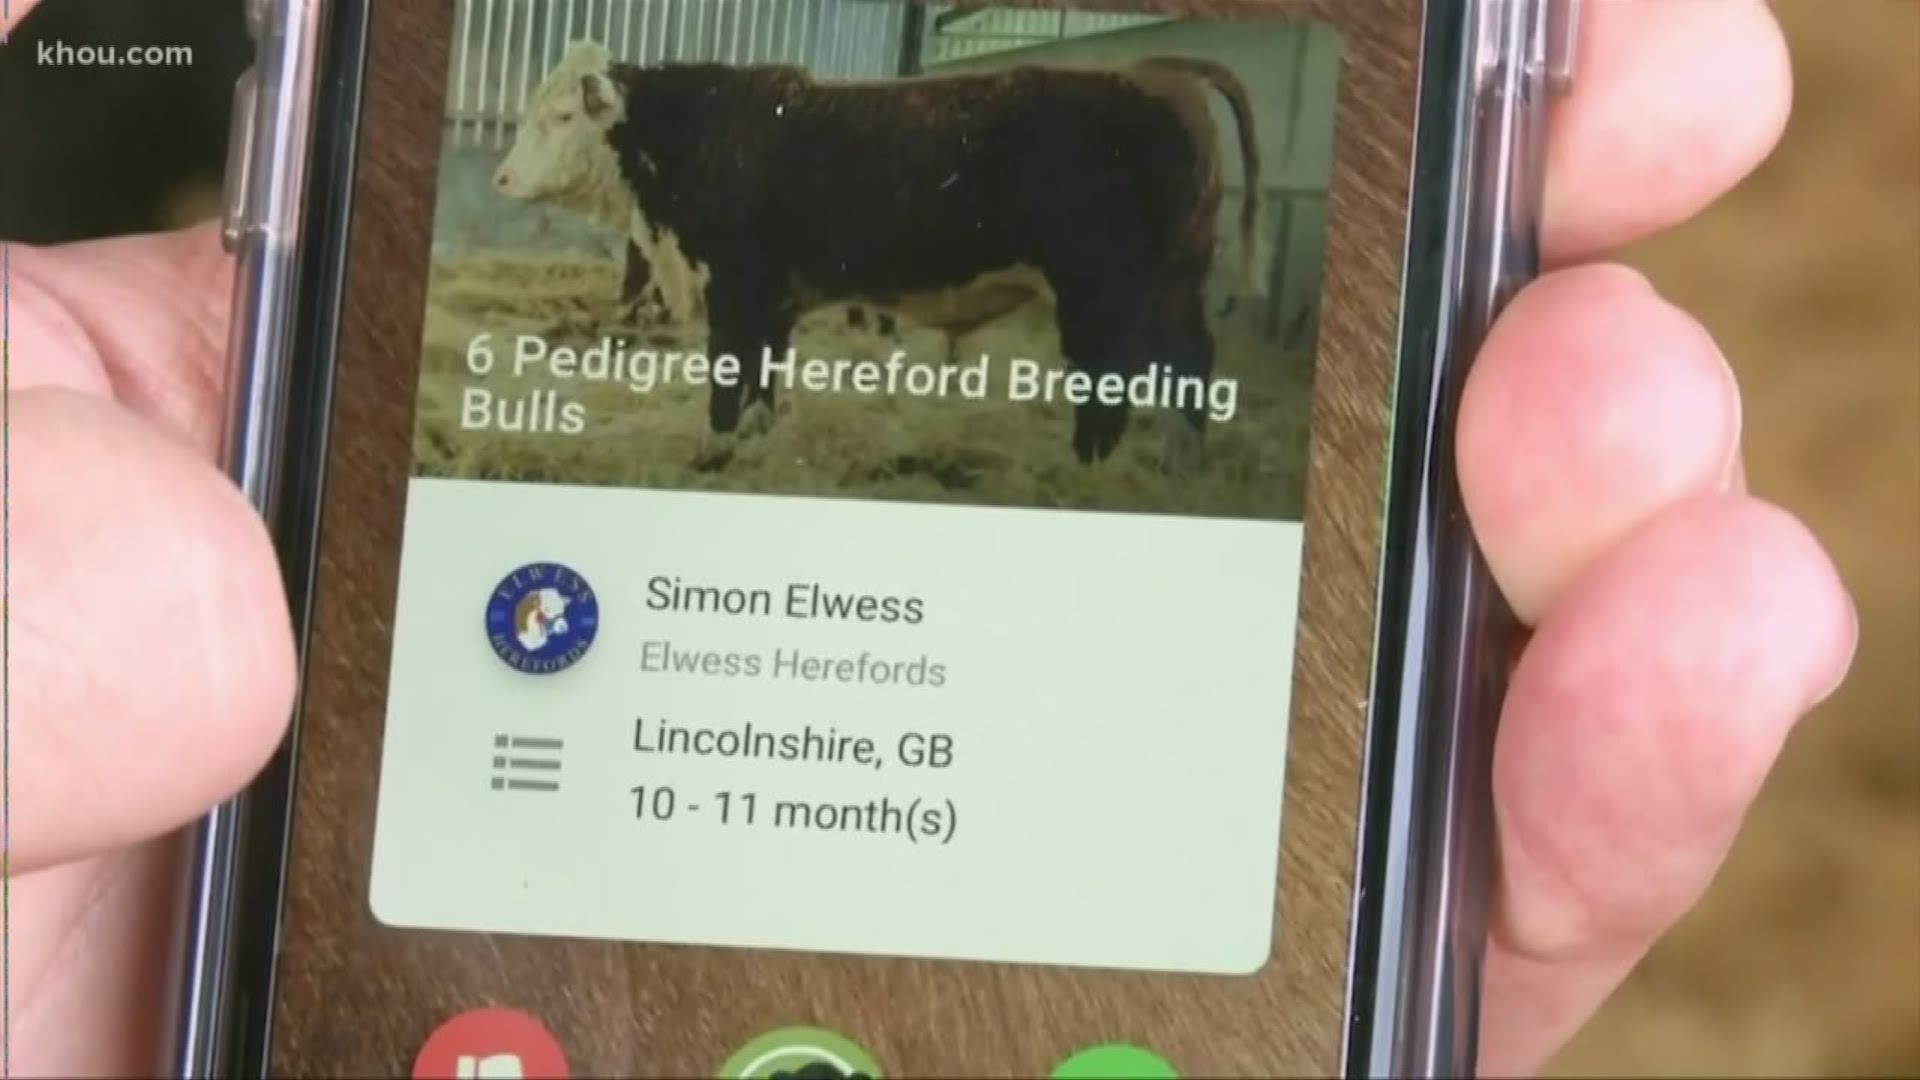 The app will allow farmers to swipe left or right to "identify breeding stock and partners for their cattle, in the quest for moo-love." In other words, farmers will be able to swipe right for yes and left for no for cows on sale.